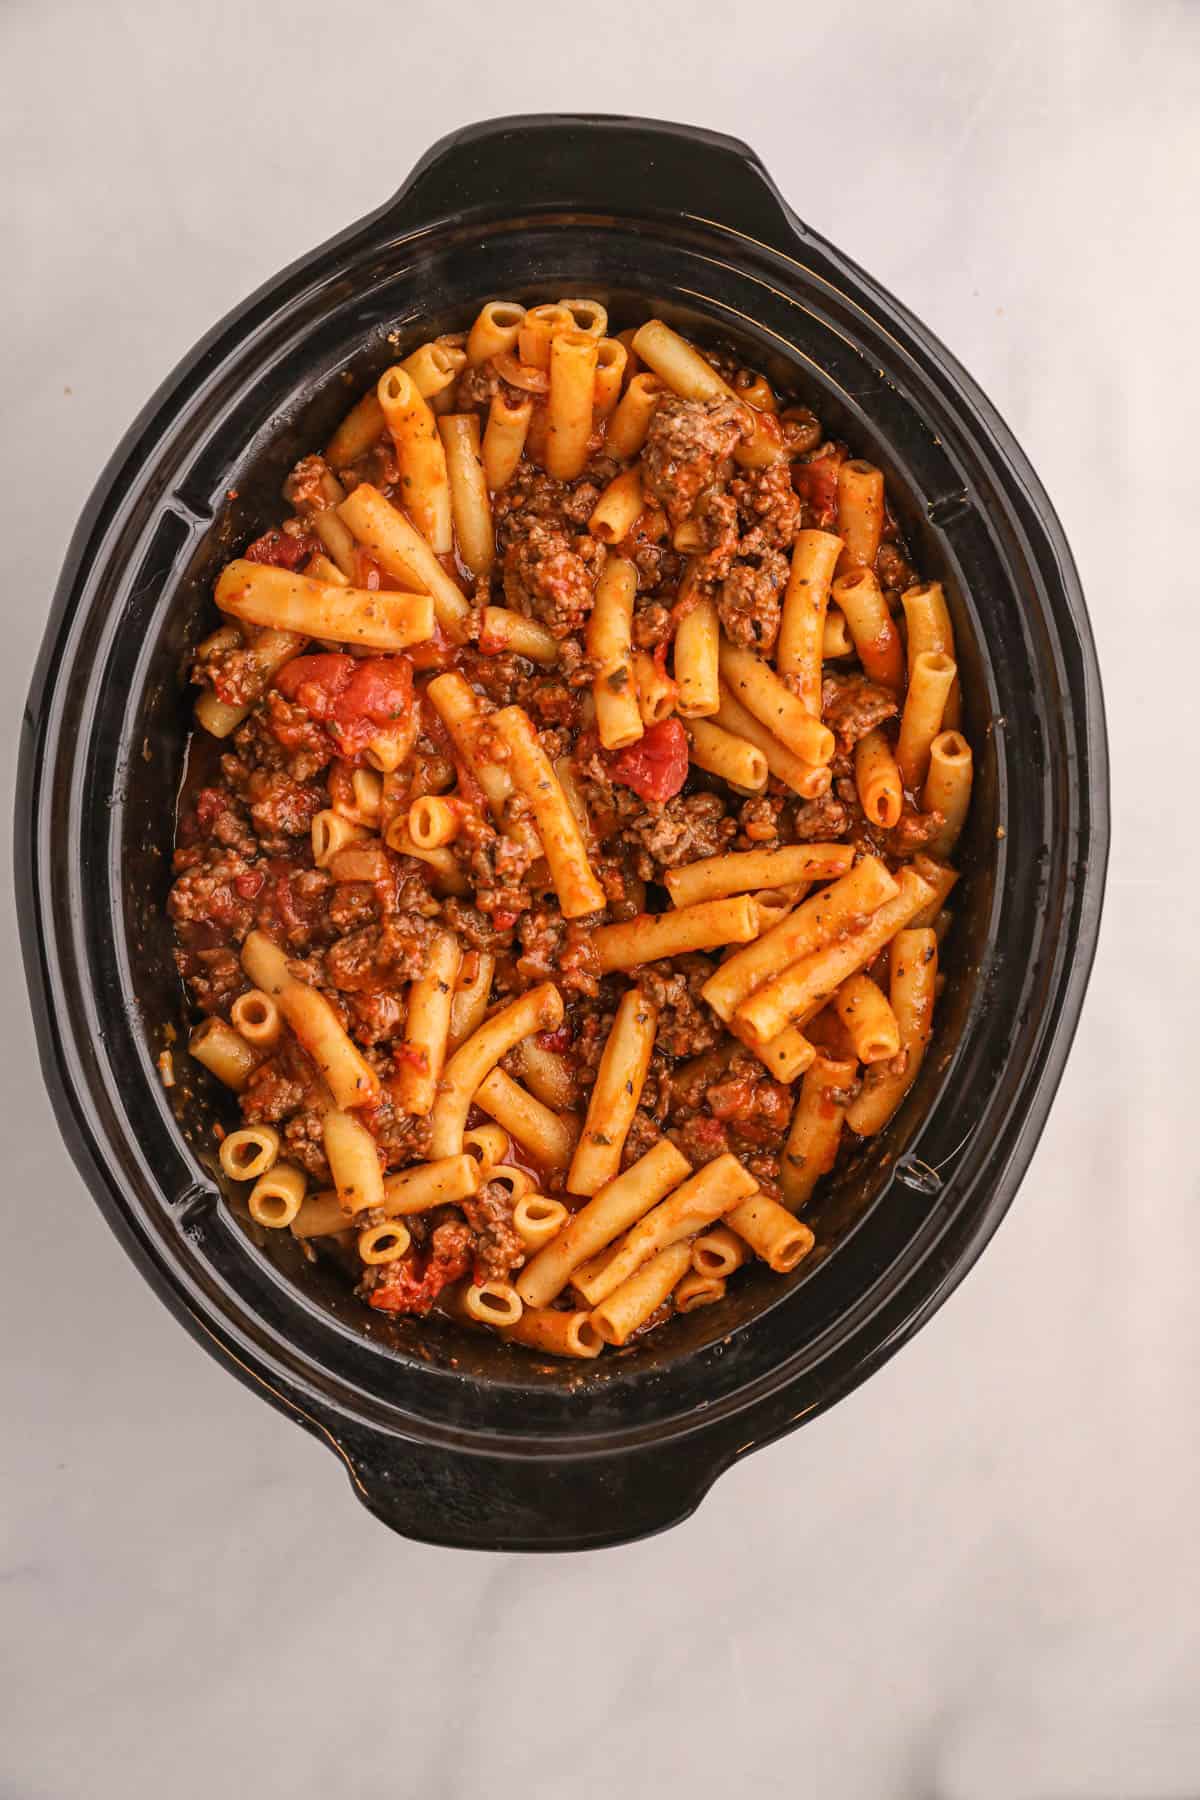 Cooked ziti pasta, meat, and sauce in a large black crock pot.